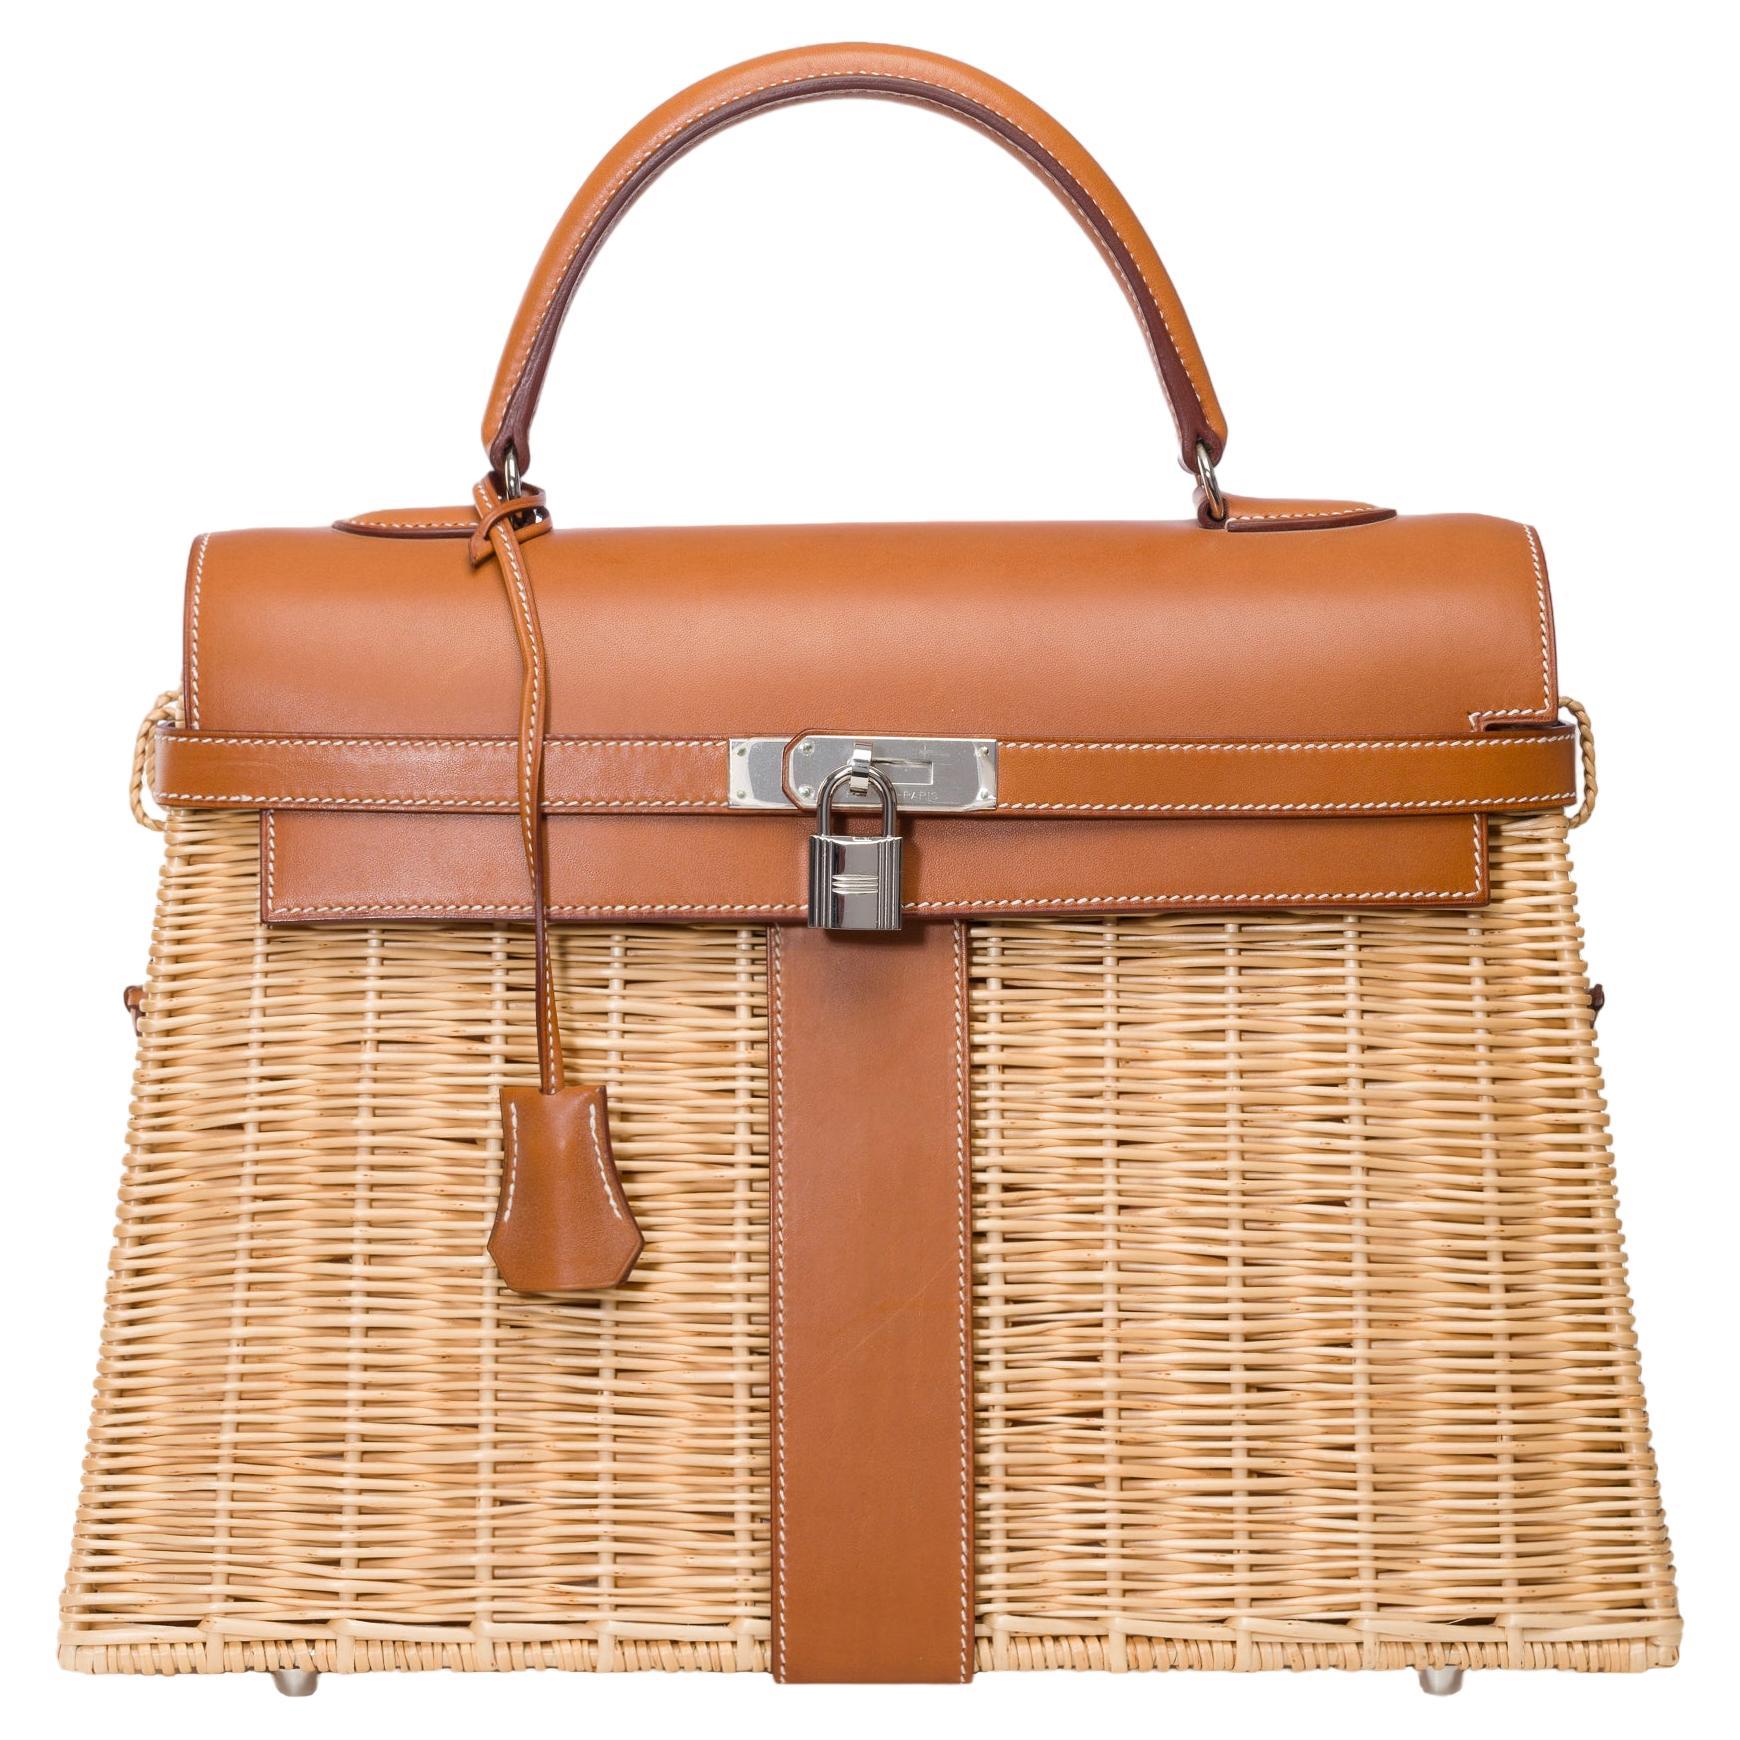 Rare Hermes Kelly 35 Picnic in wicker and barenia leather , SHW For Sale